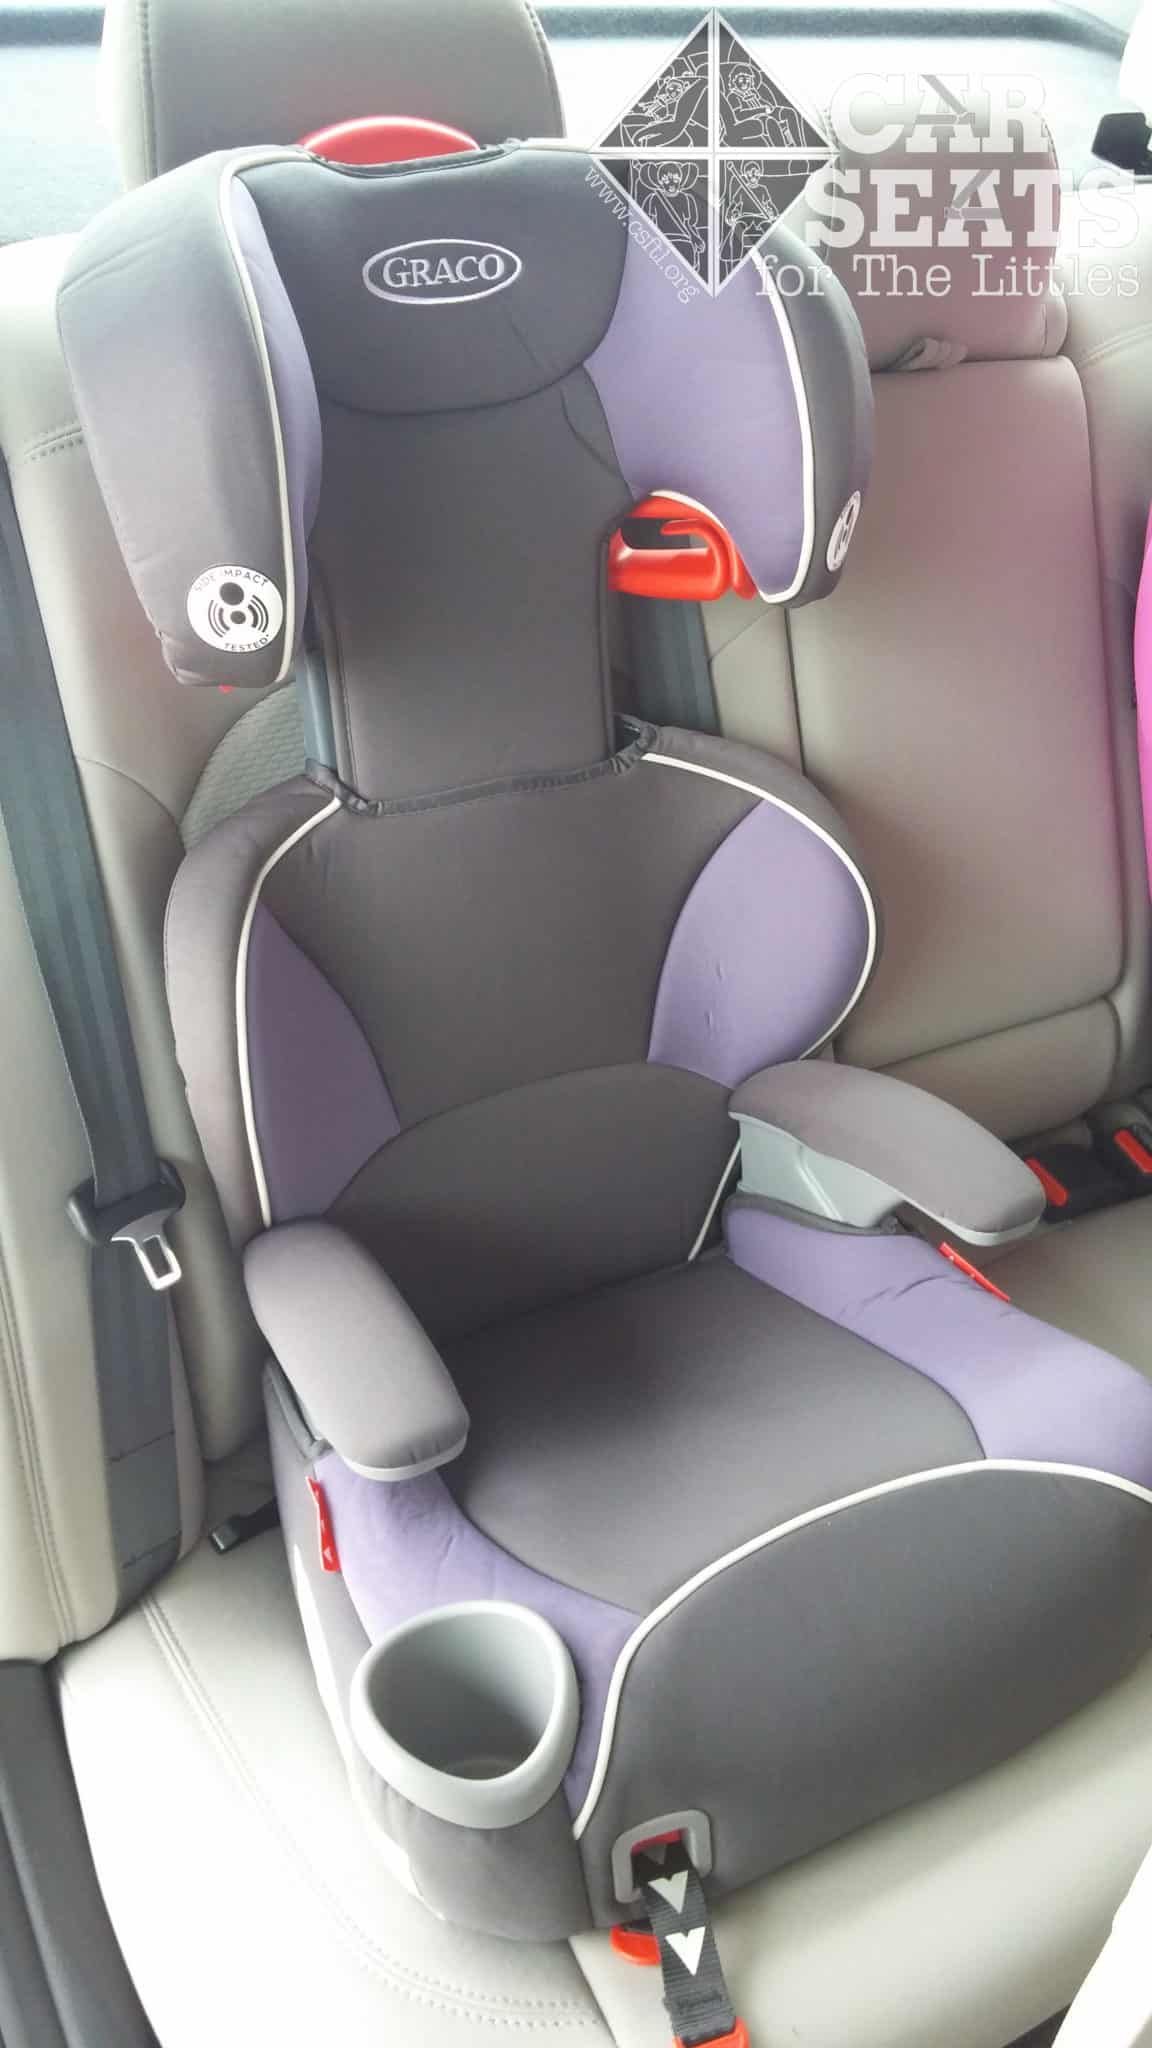 Graco Affix Review - Car Seats For The Littles